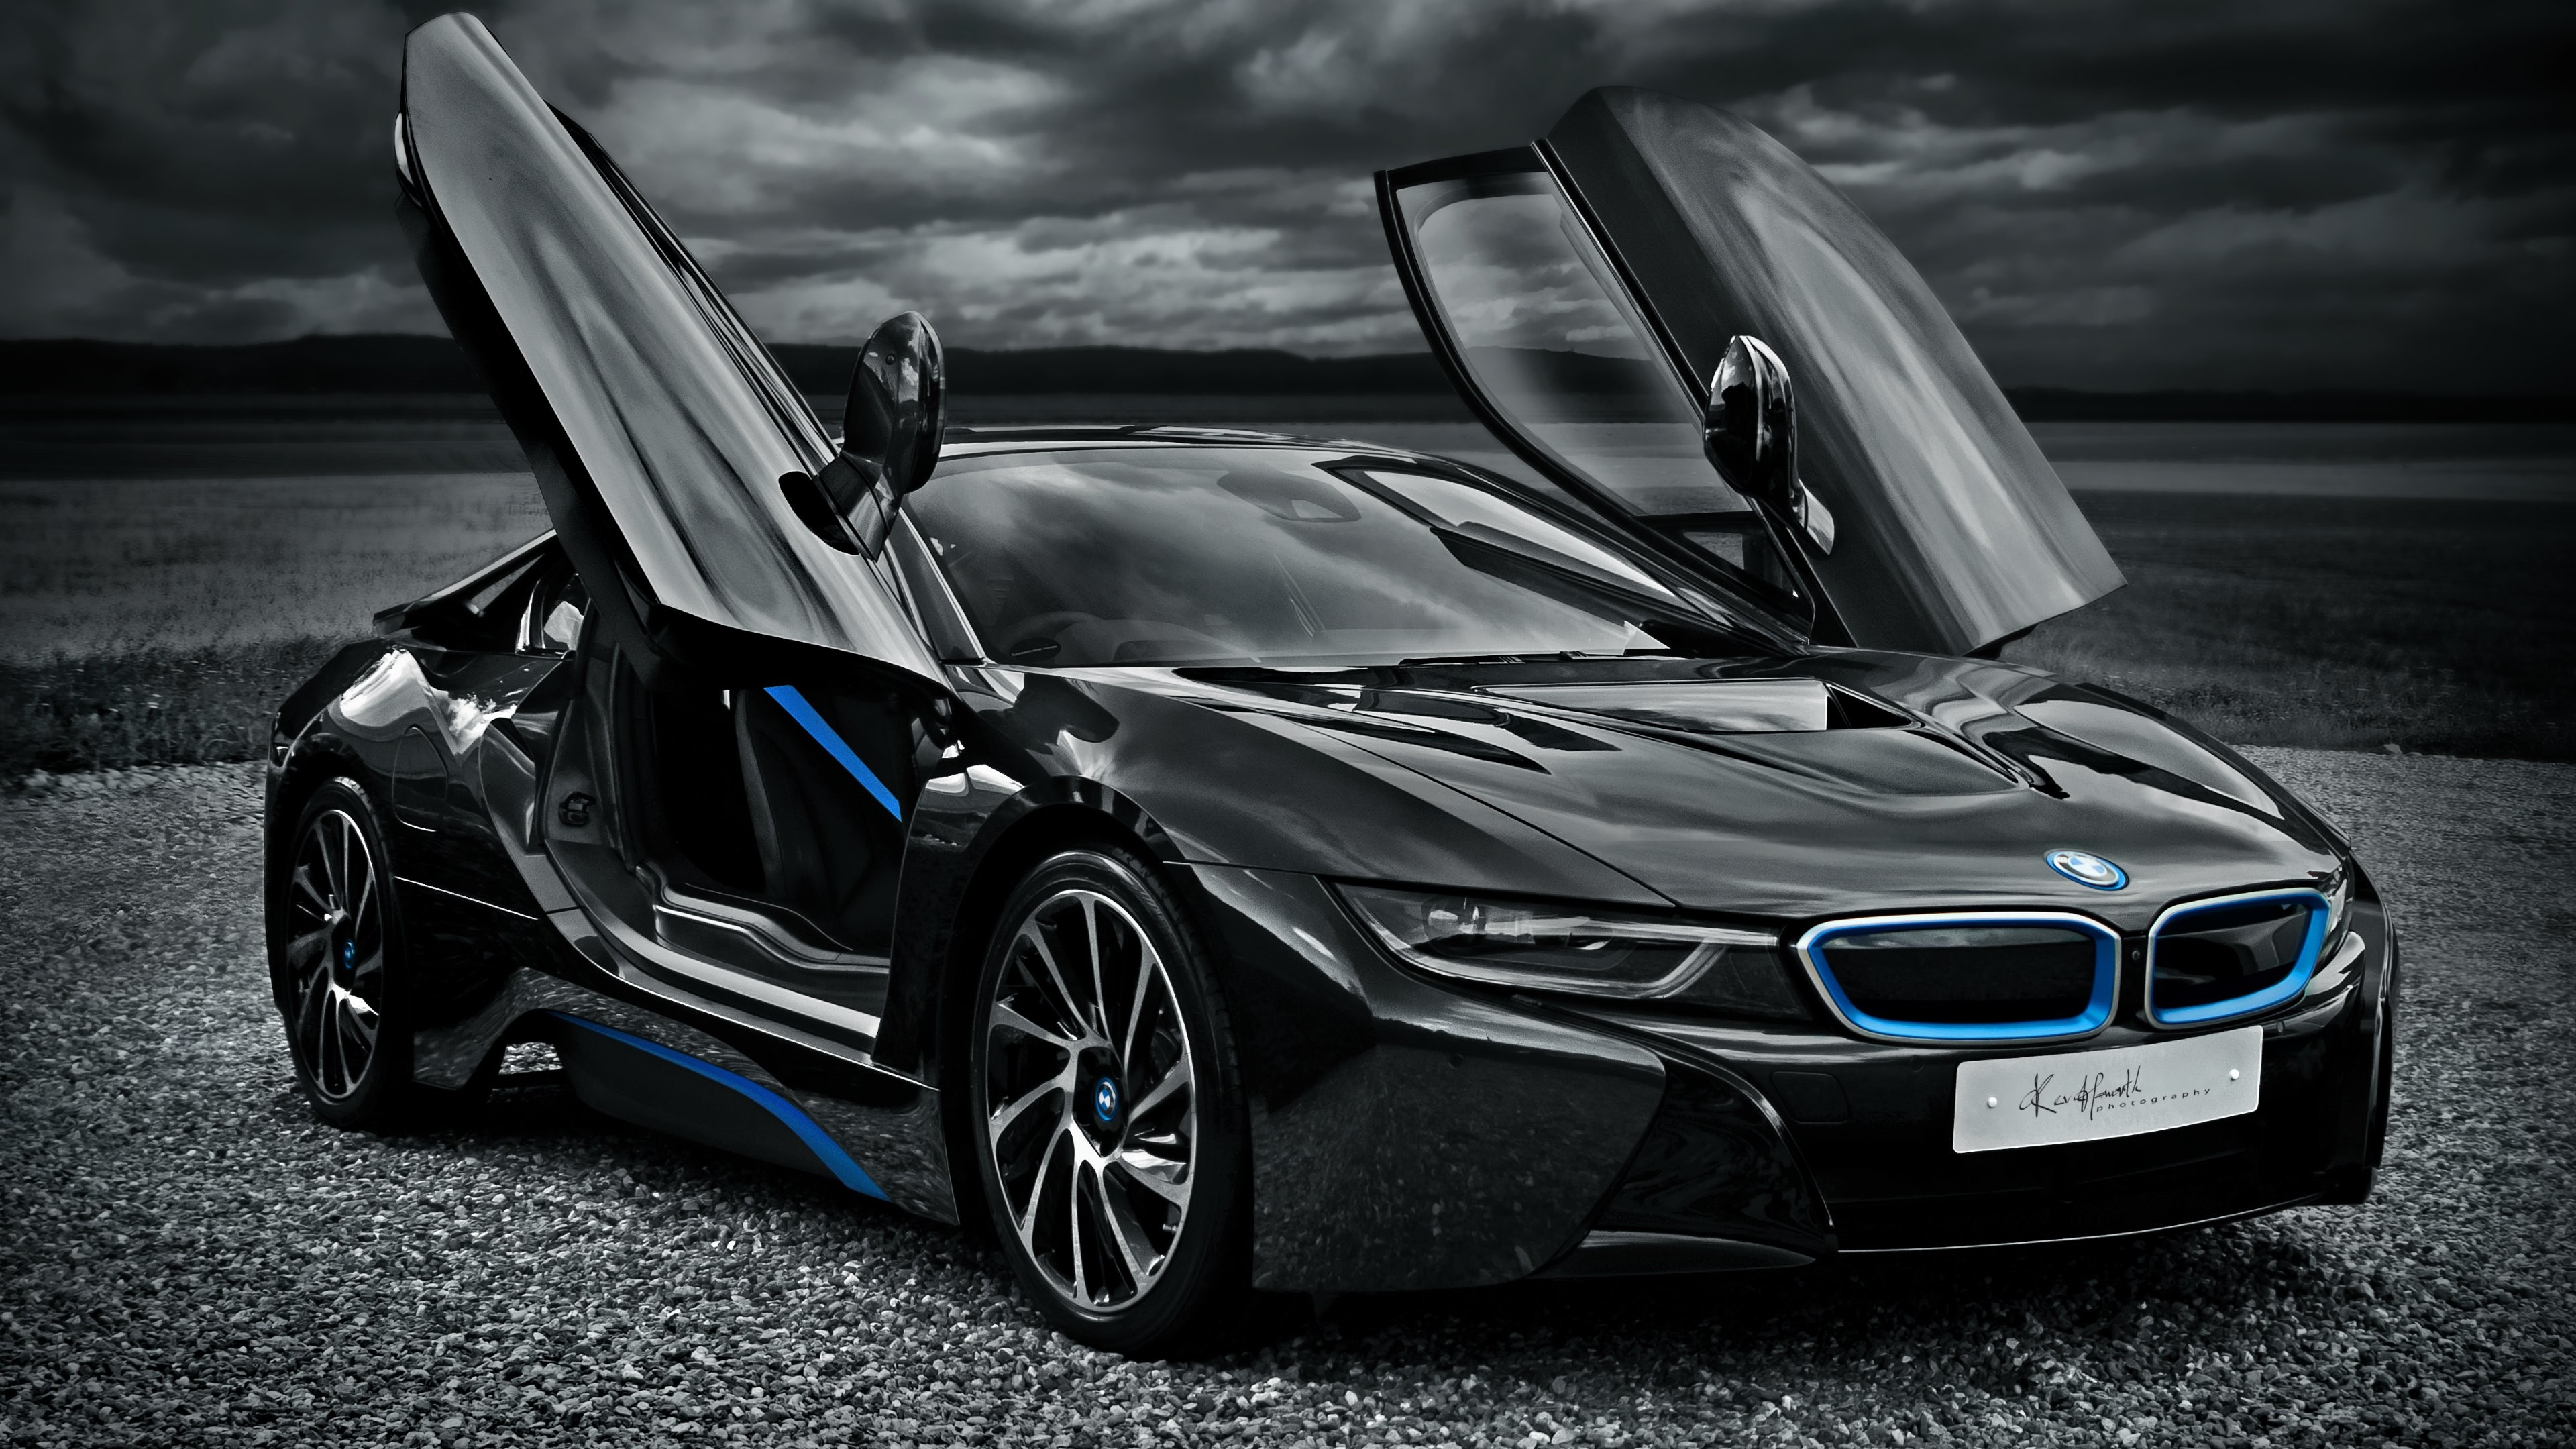 3840x2160 Modest BMW I8 Black By Pictures R2nw And BMW I8 Black On Galleries